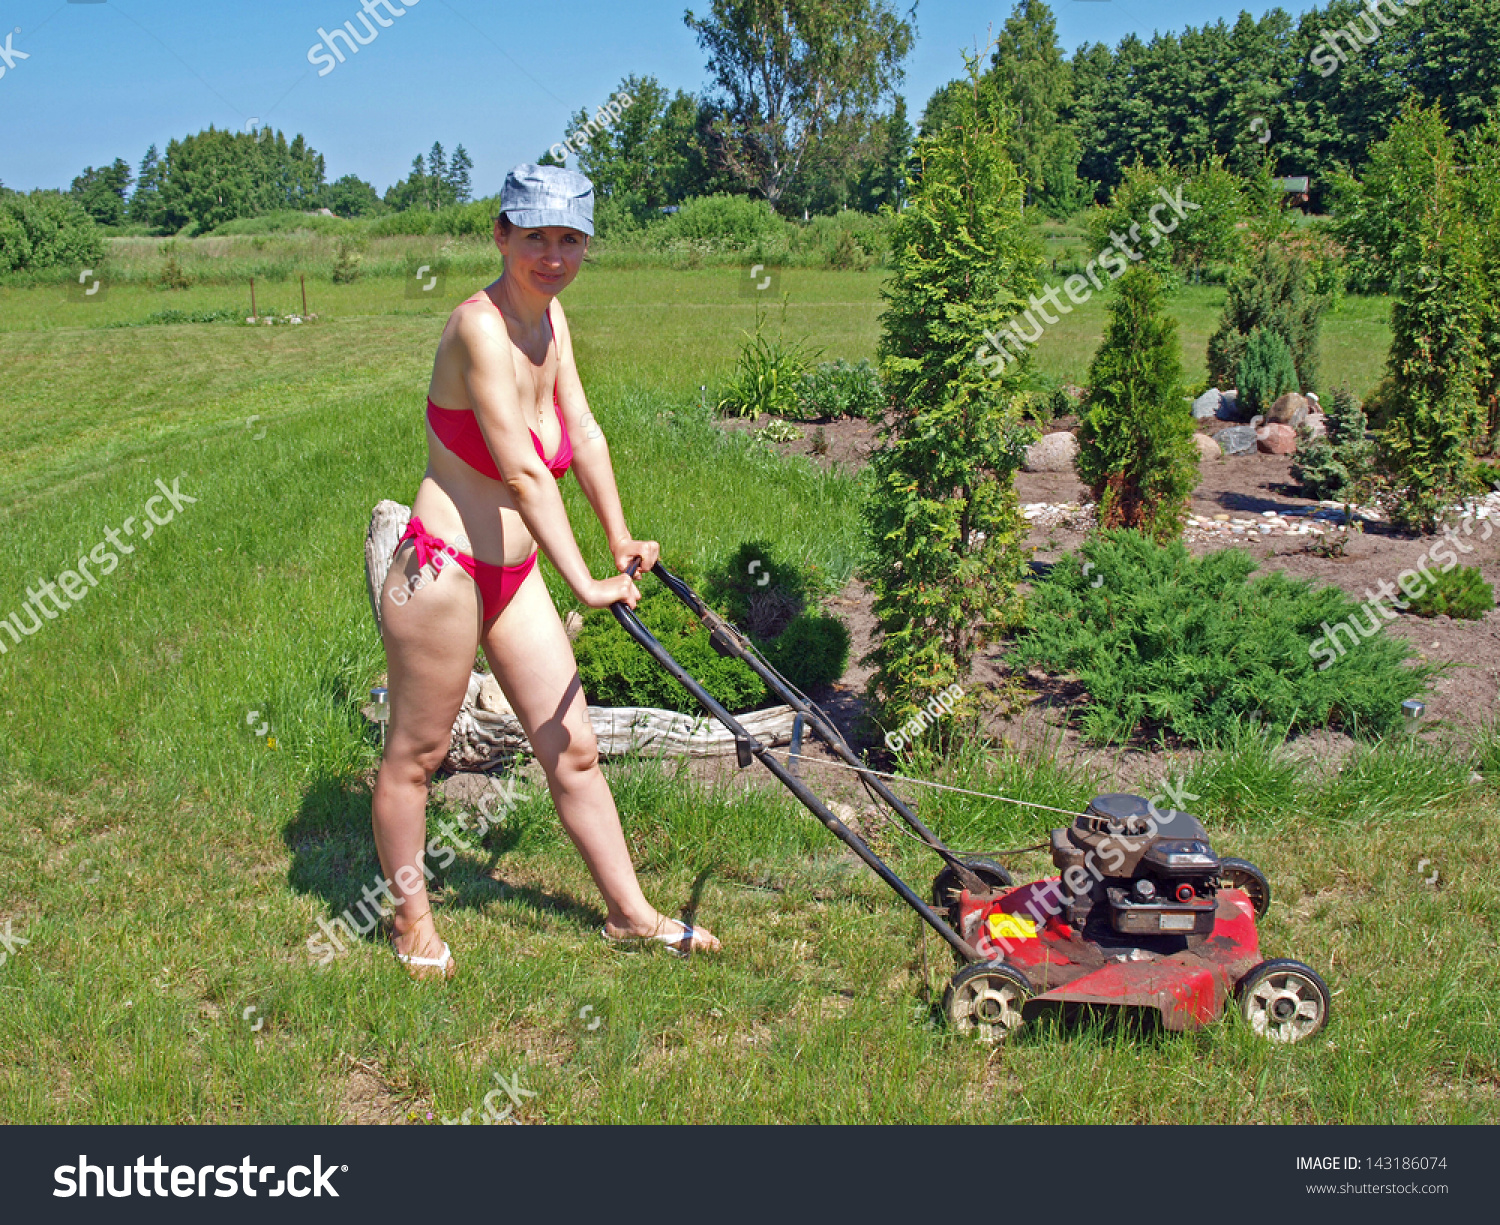 mowing the lawn naked